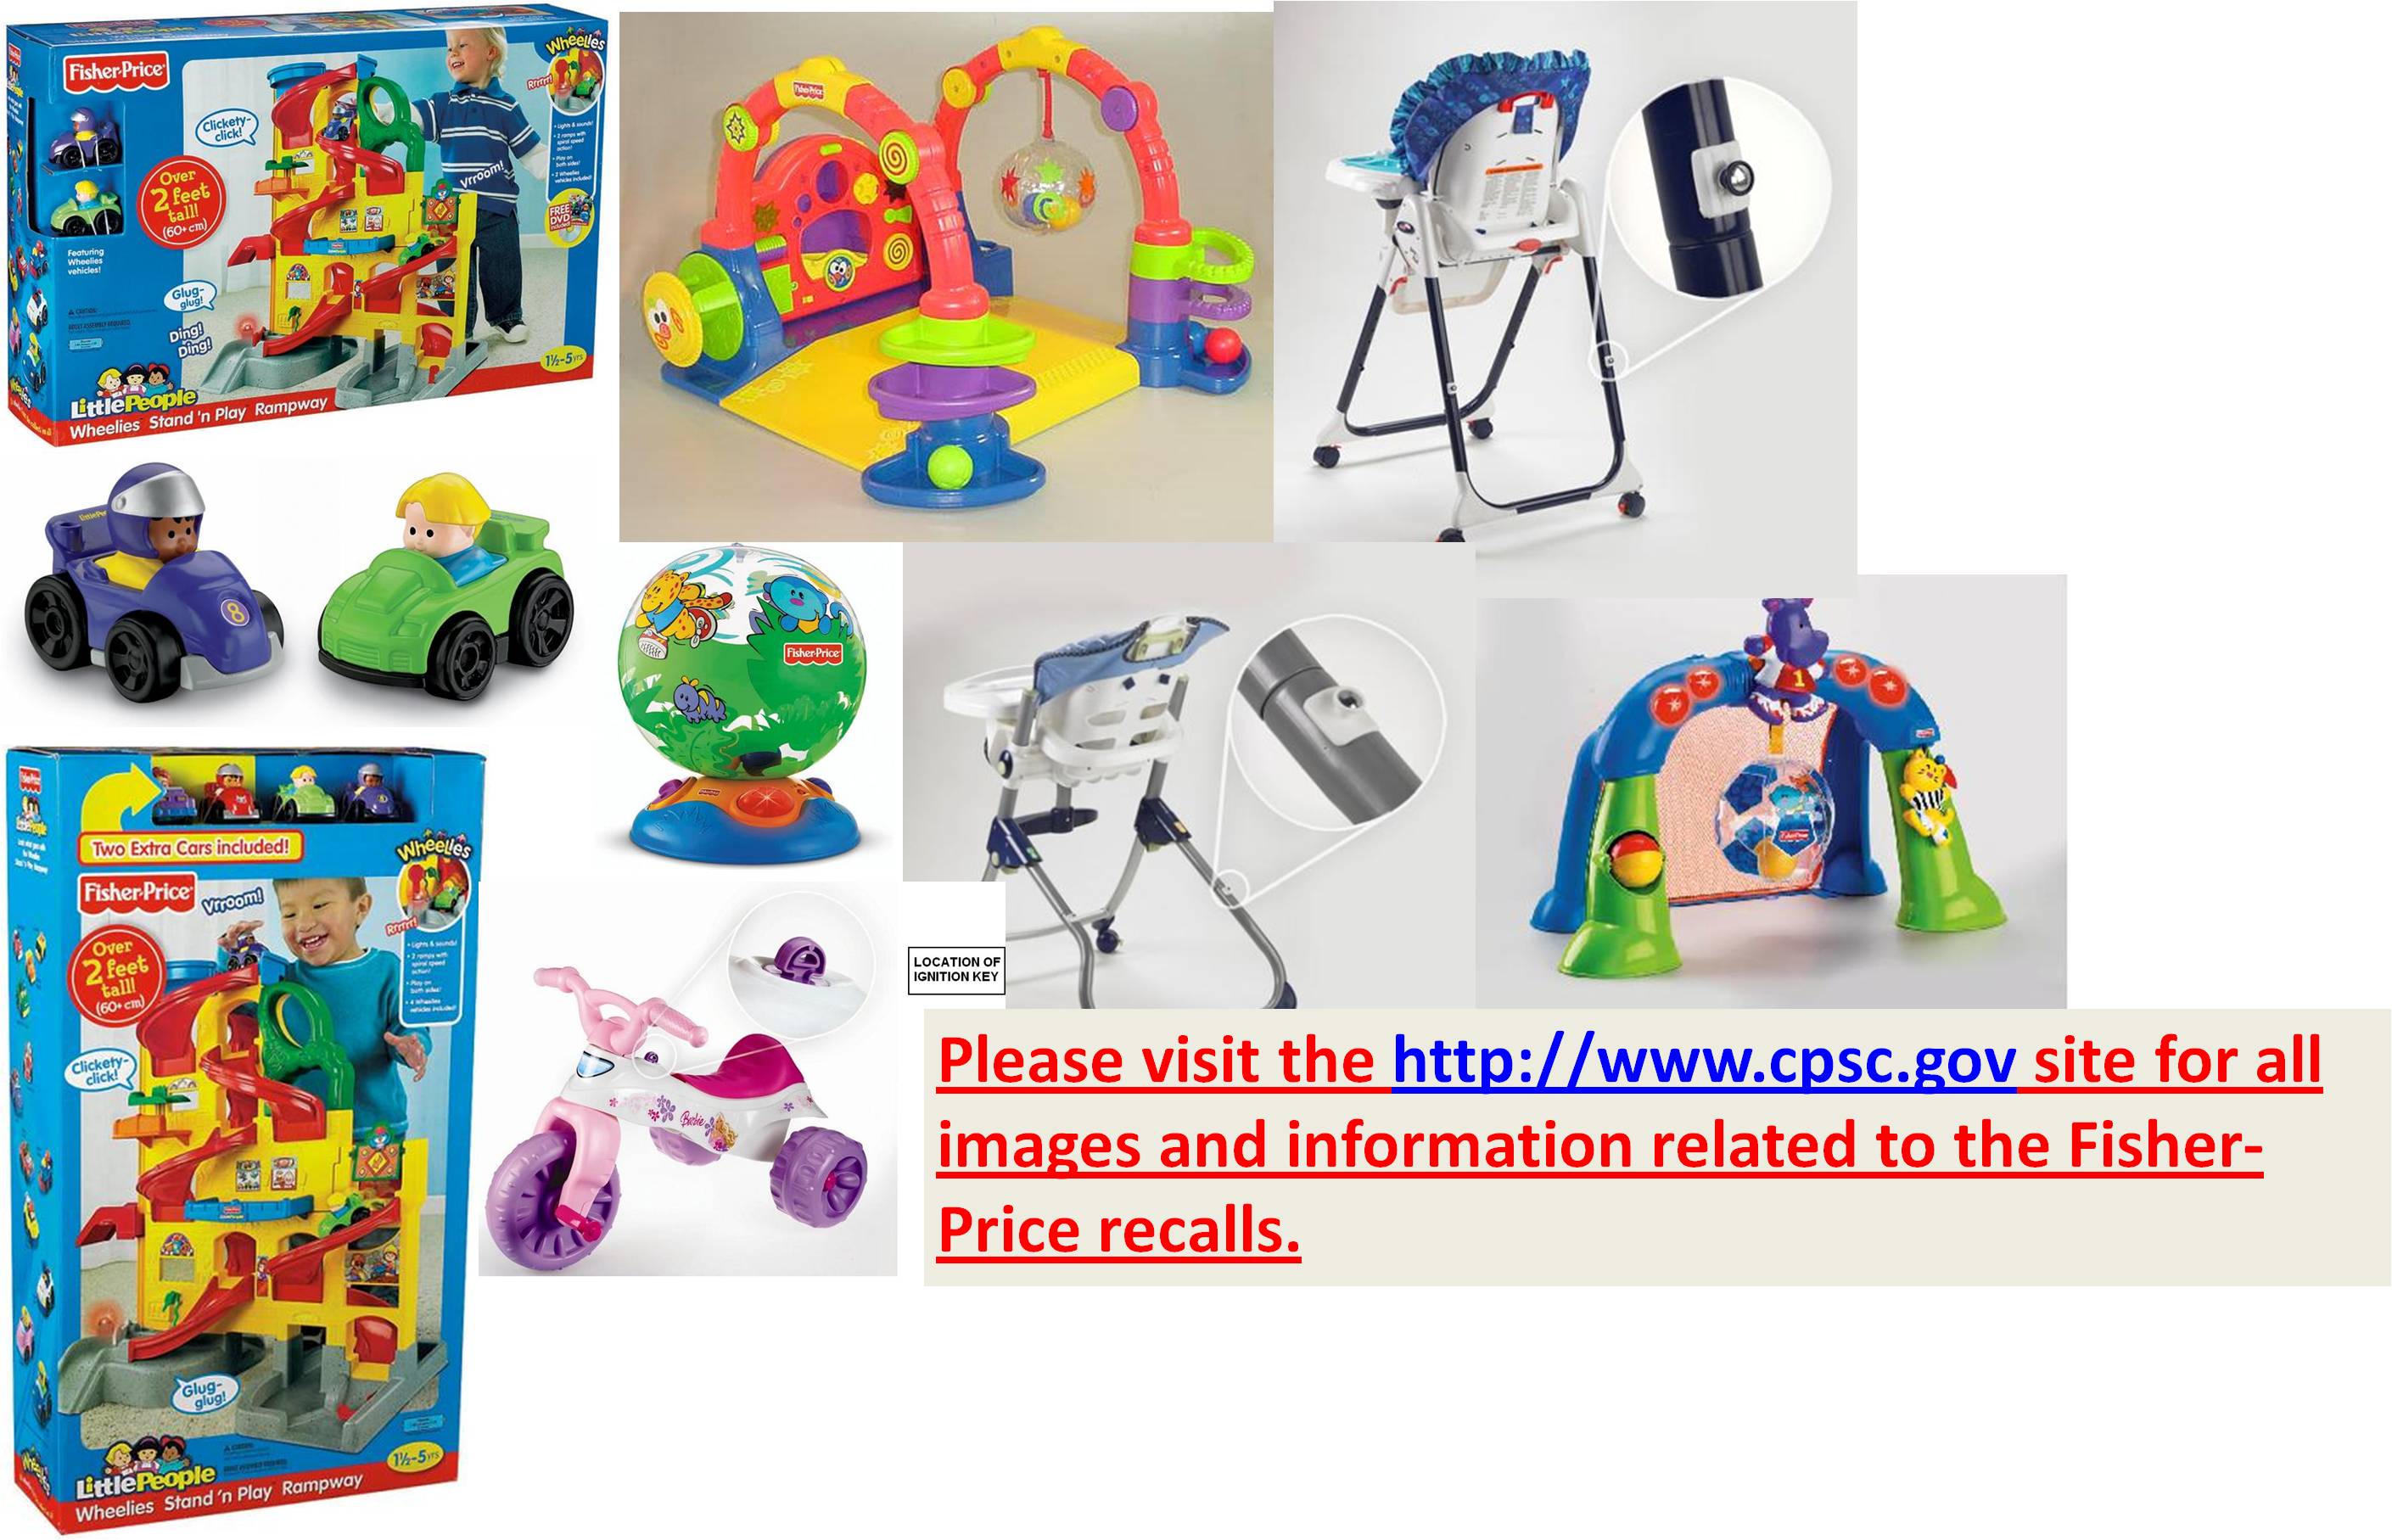 Fisher-Price Recalls More than 10M Kid Products